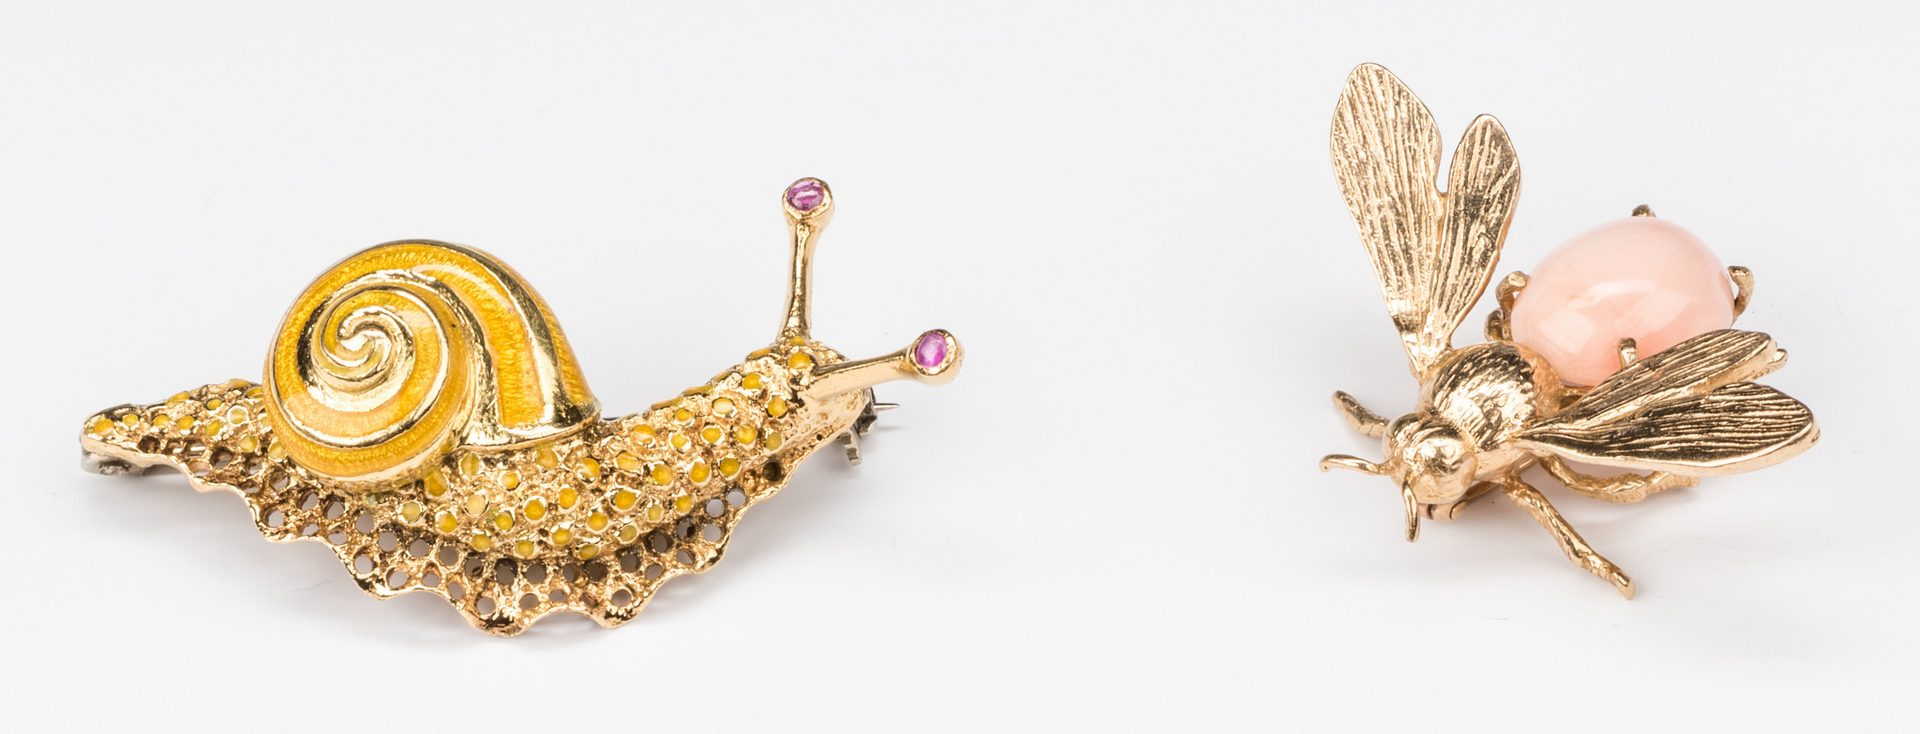 Lot 384: Gold Snail and Bee Pins